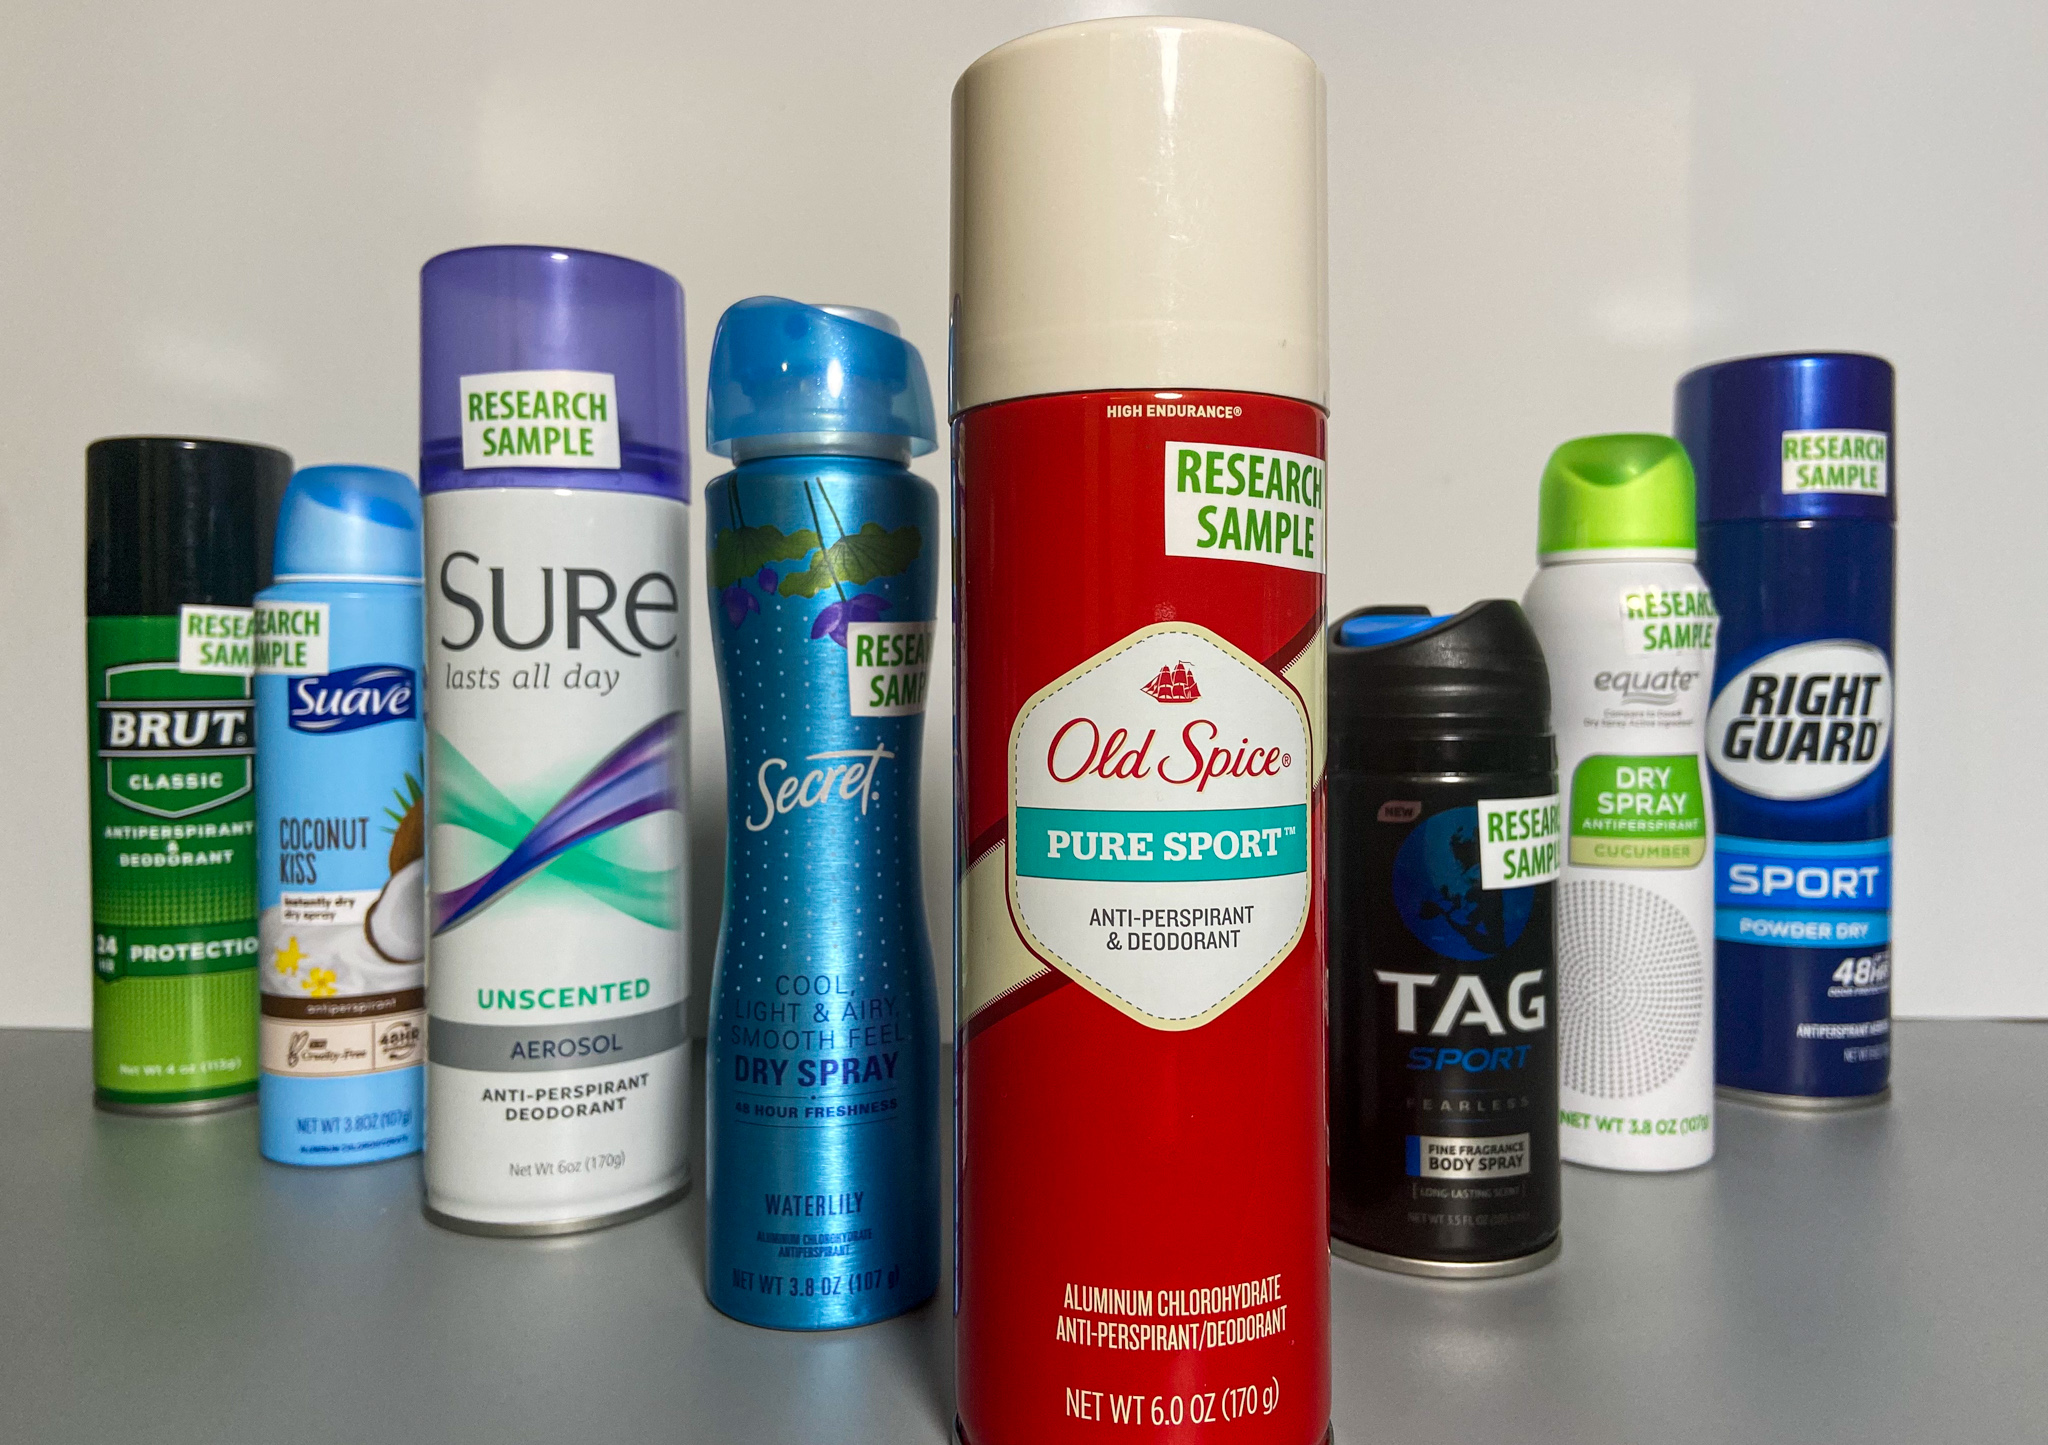 Does Deodorant Cause Cancer? Leukemia-Causing Benzene Found in Some Sprays  - Bloomberg